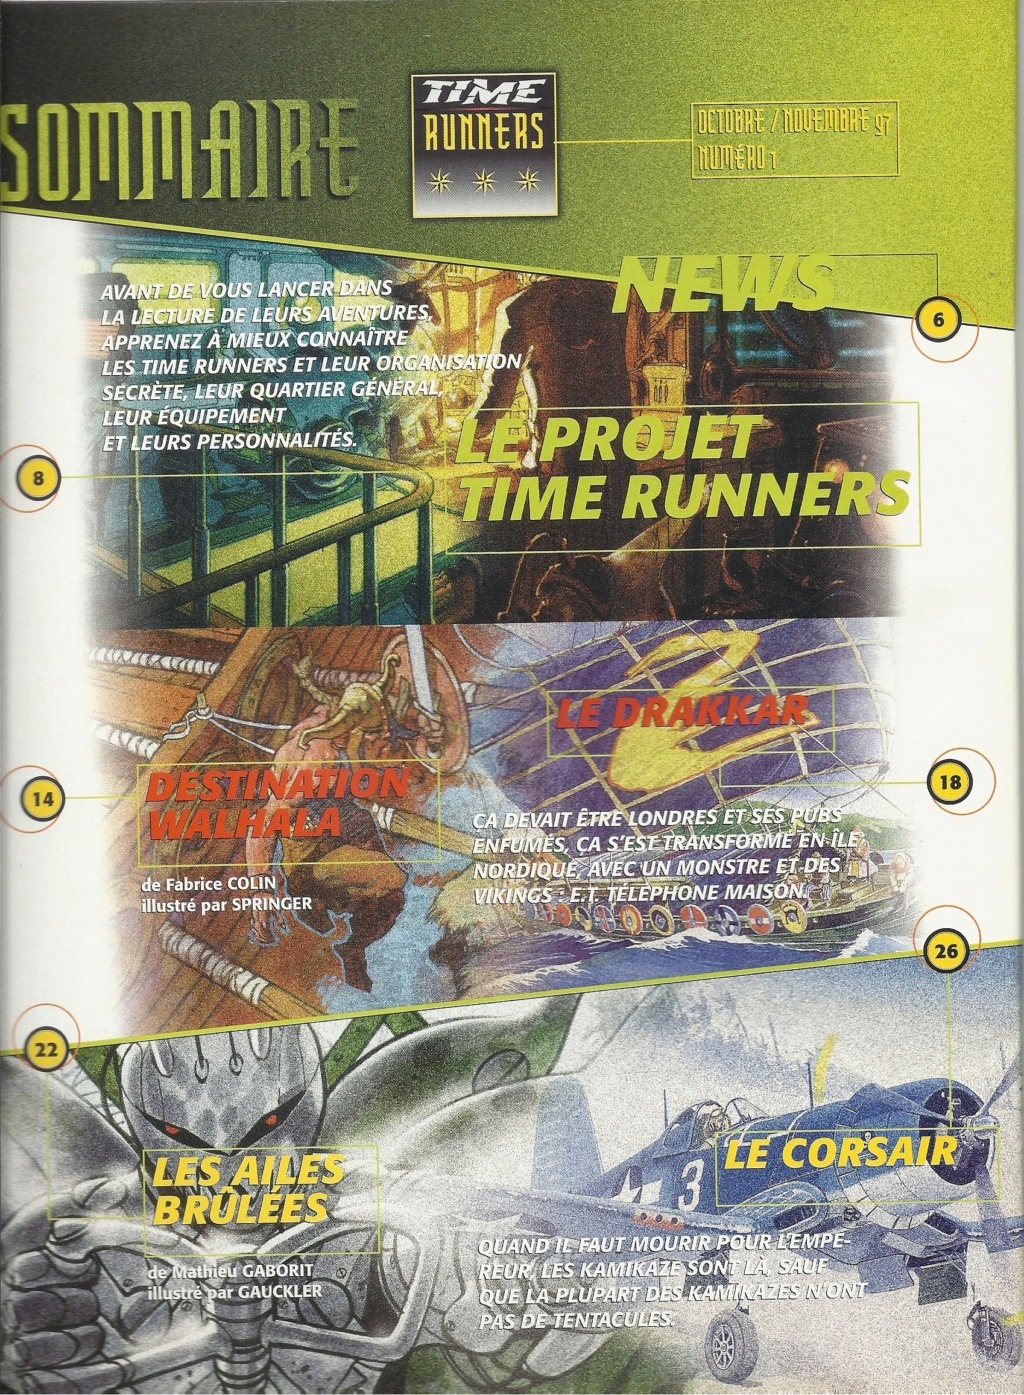 [1997] Revue TIME RUNNERS n°1 Octobre Novembre 1997 Hell5443